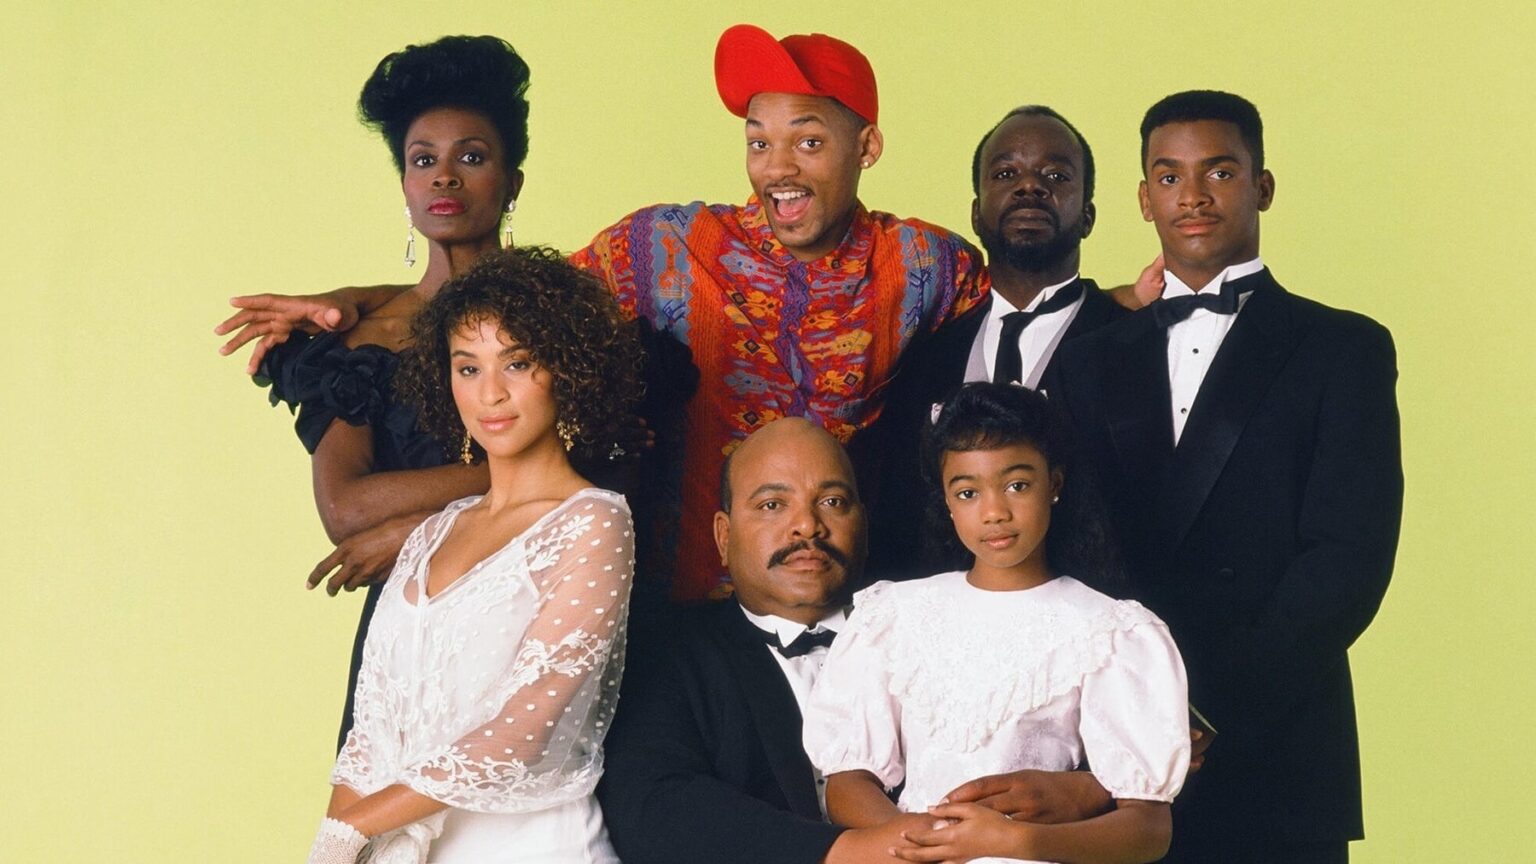 The cast of 'The Fresh Prince of Bel-Air' wasn't always chummy. Here's a look inside the major 'Fresh Prince' feud from the last season.